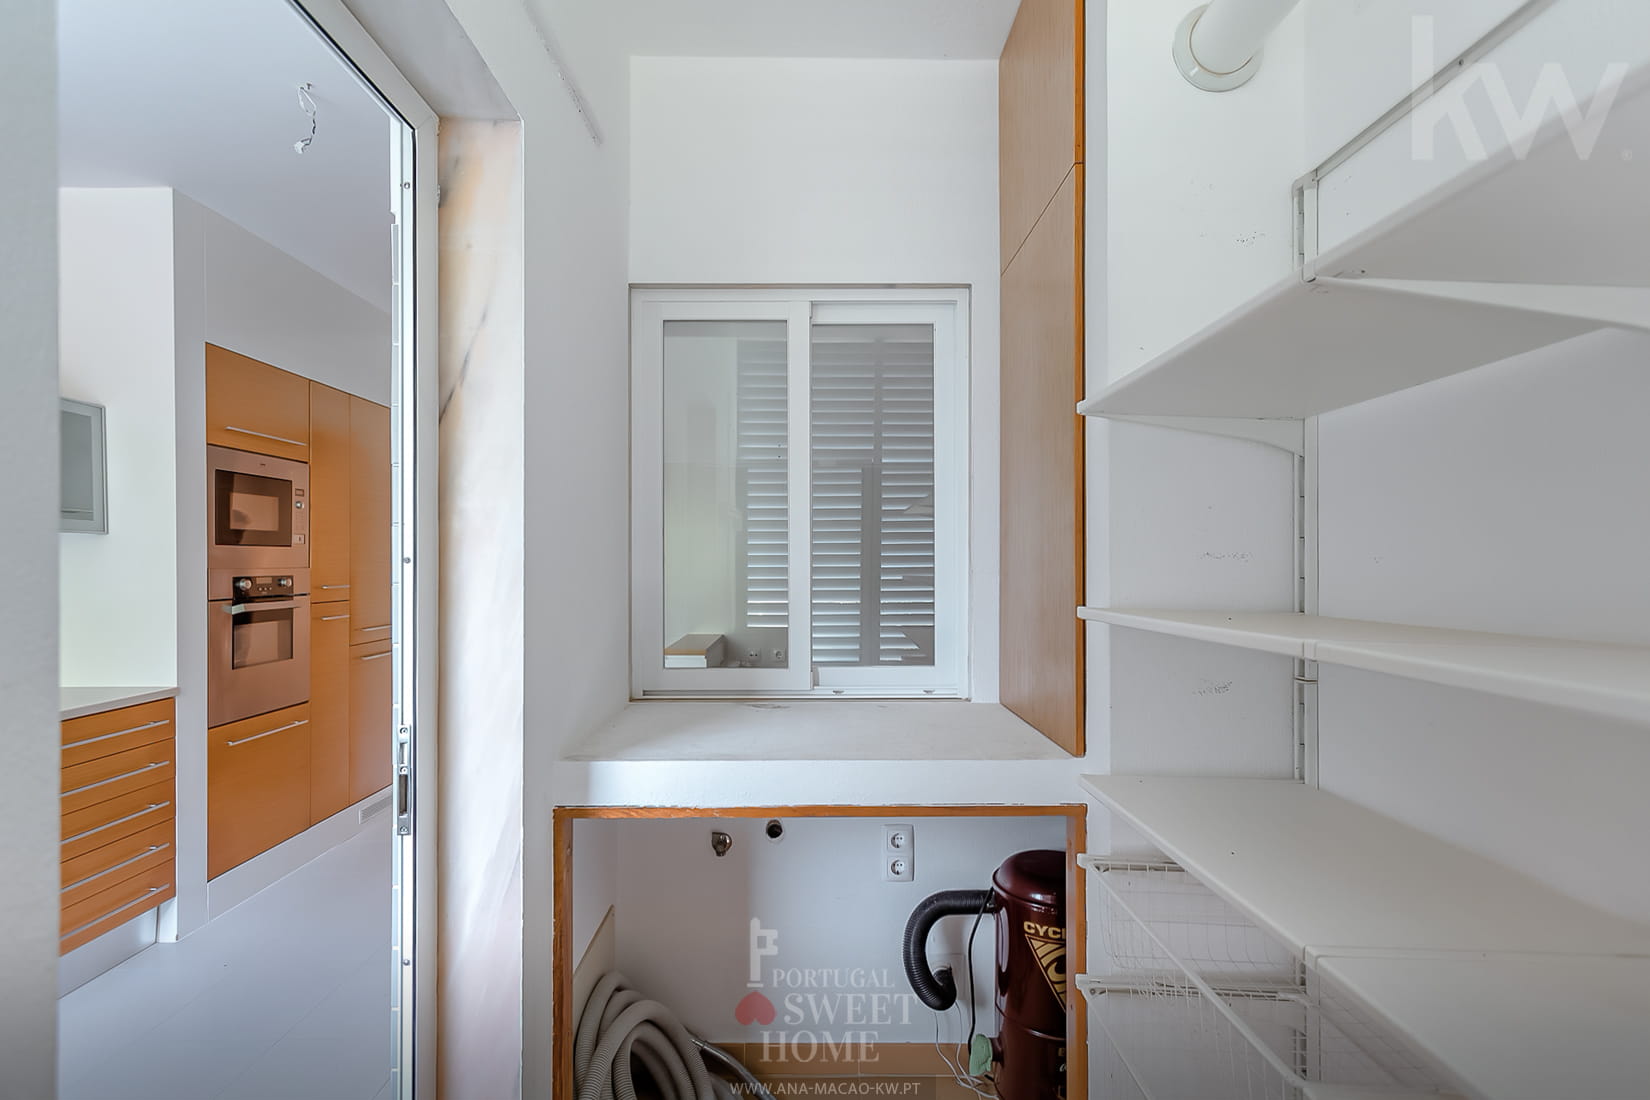 Laundry and Drying Room Division (3.3 Fully equipped kitchen (13.9 m²), attached to the kitchen